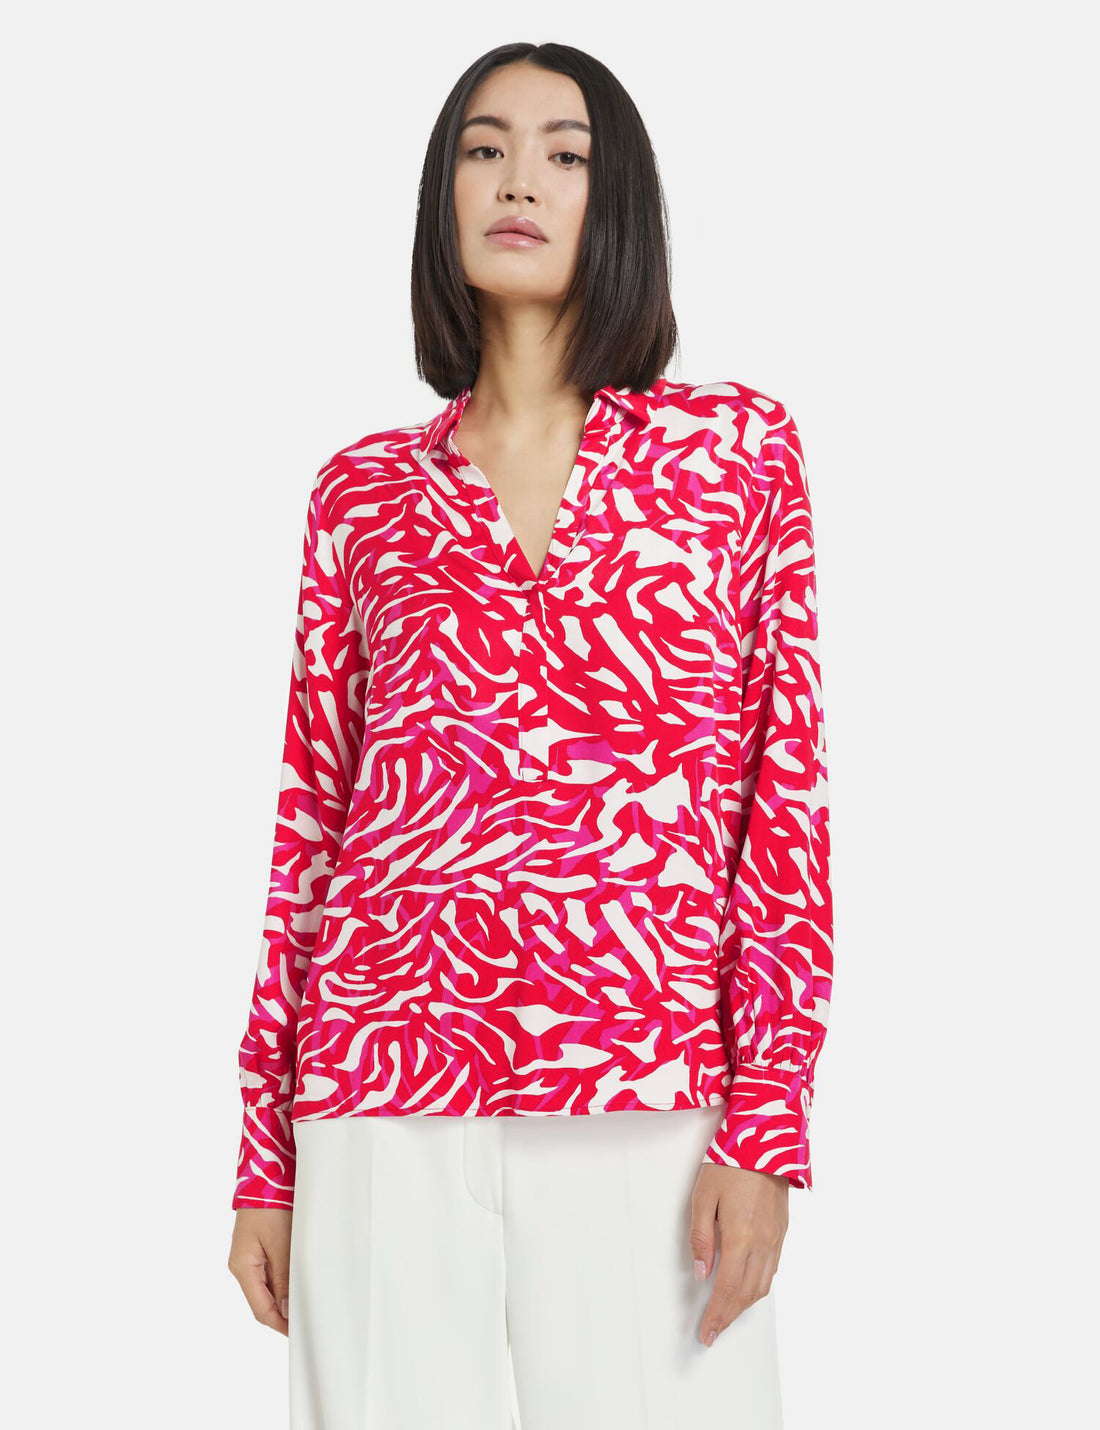 Blouse With An All-Over Print_560329-11101_6522_01